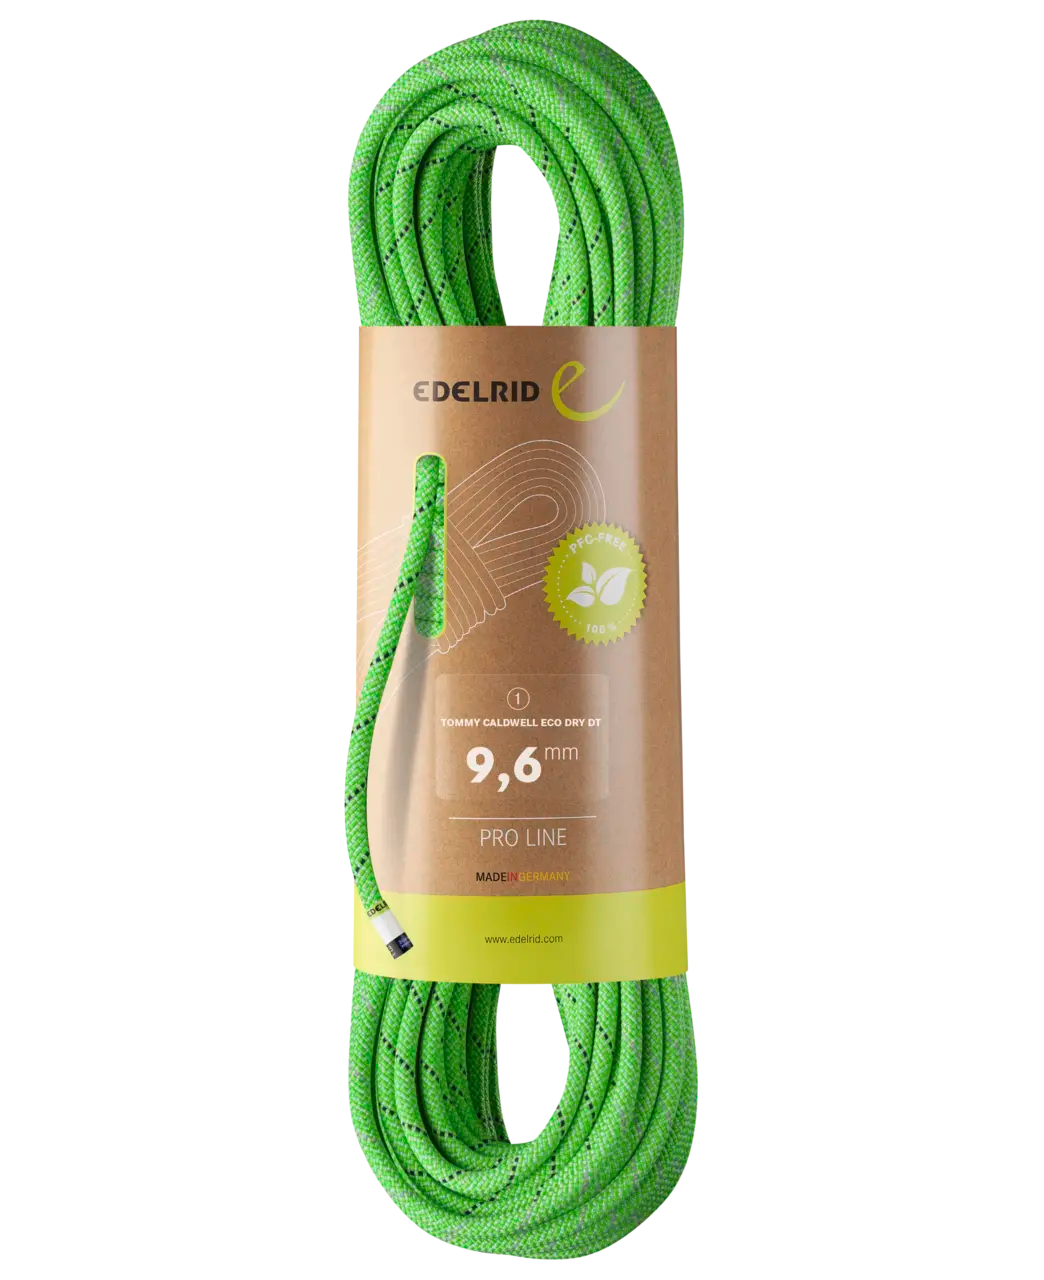 9.6 Tommy Caldwell Eco Dry DuoTec Rope